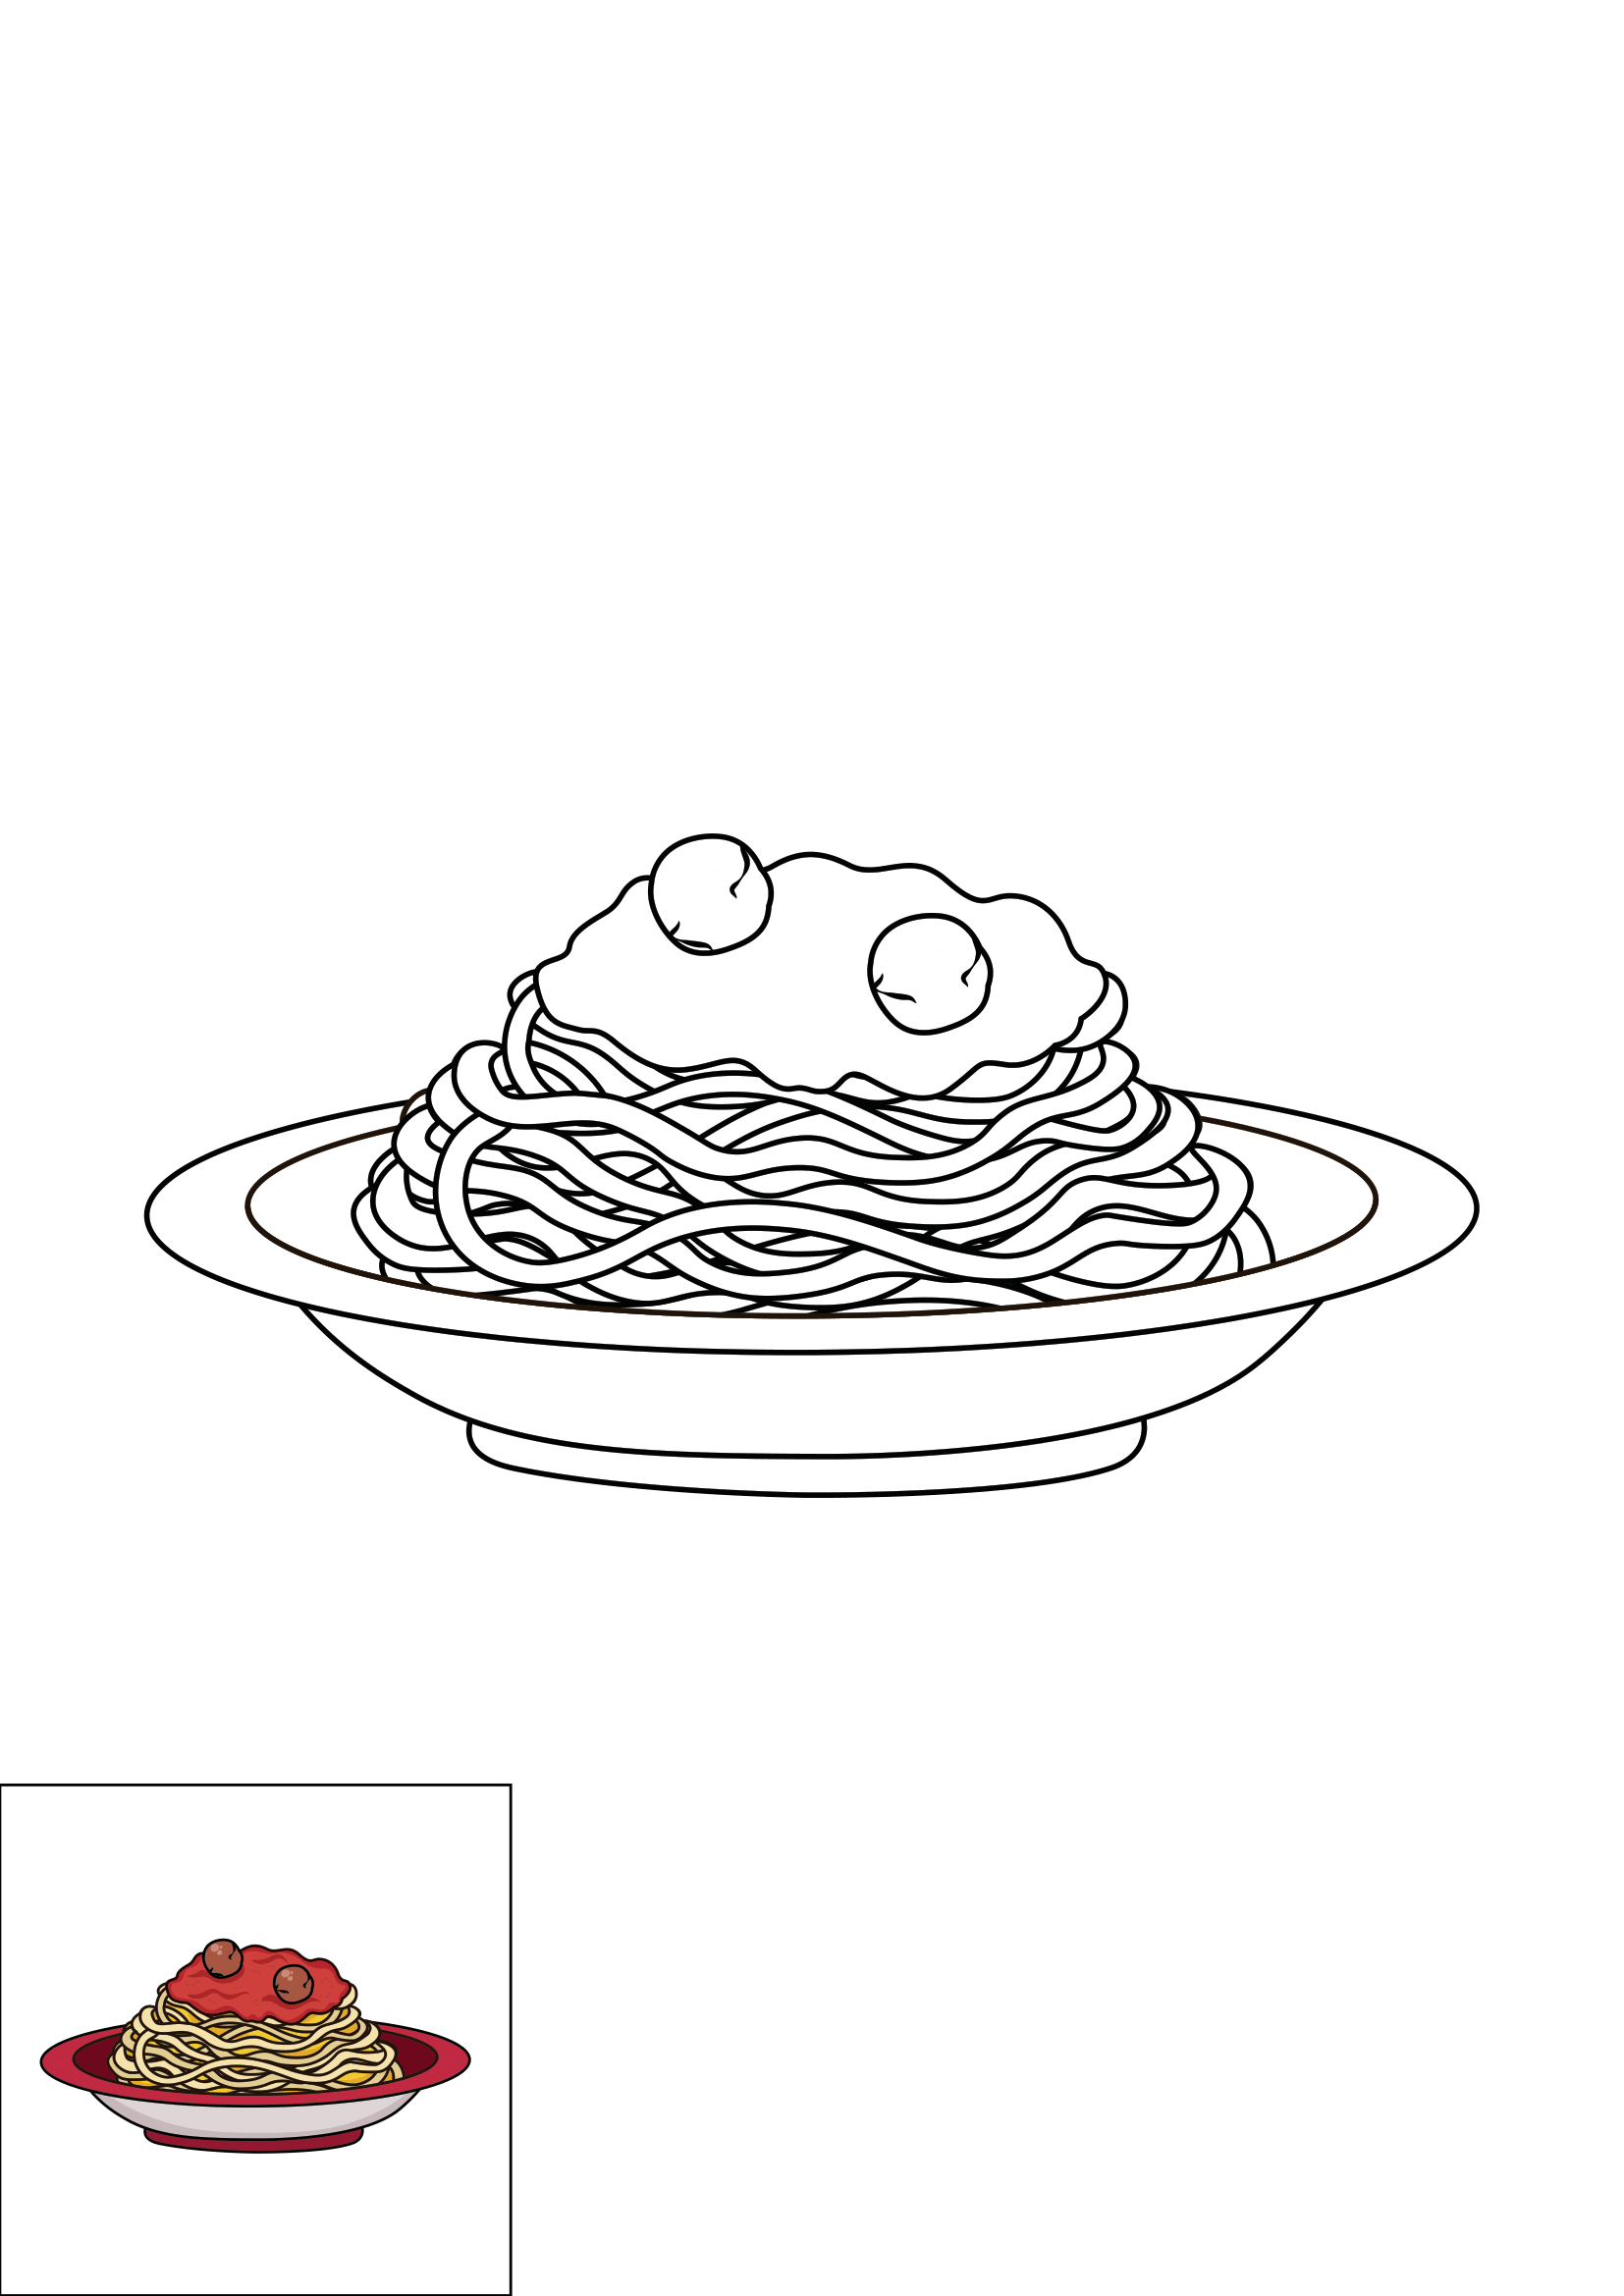 How to Draw Spaghetti And Meatballs Step by Step Printable Color